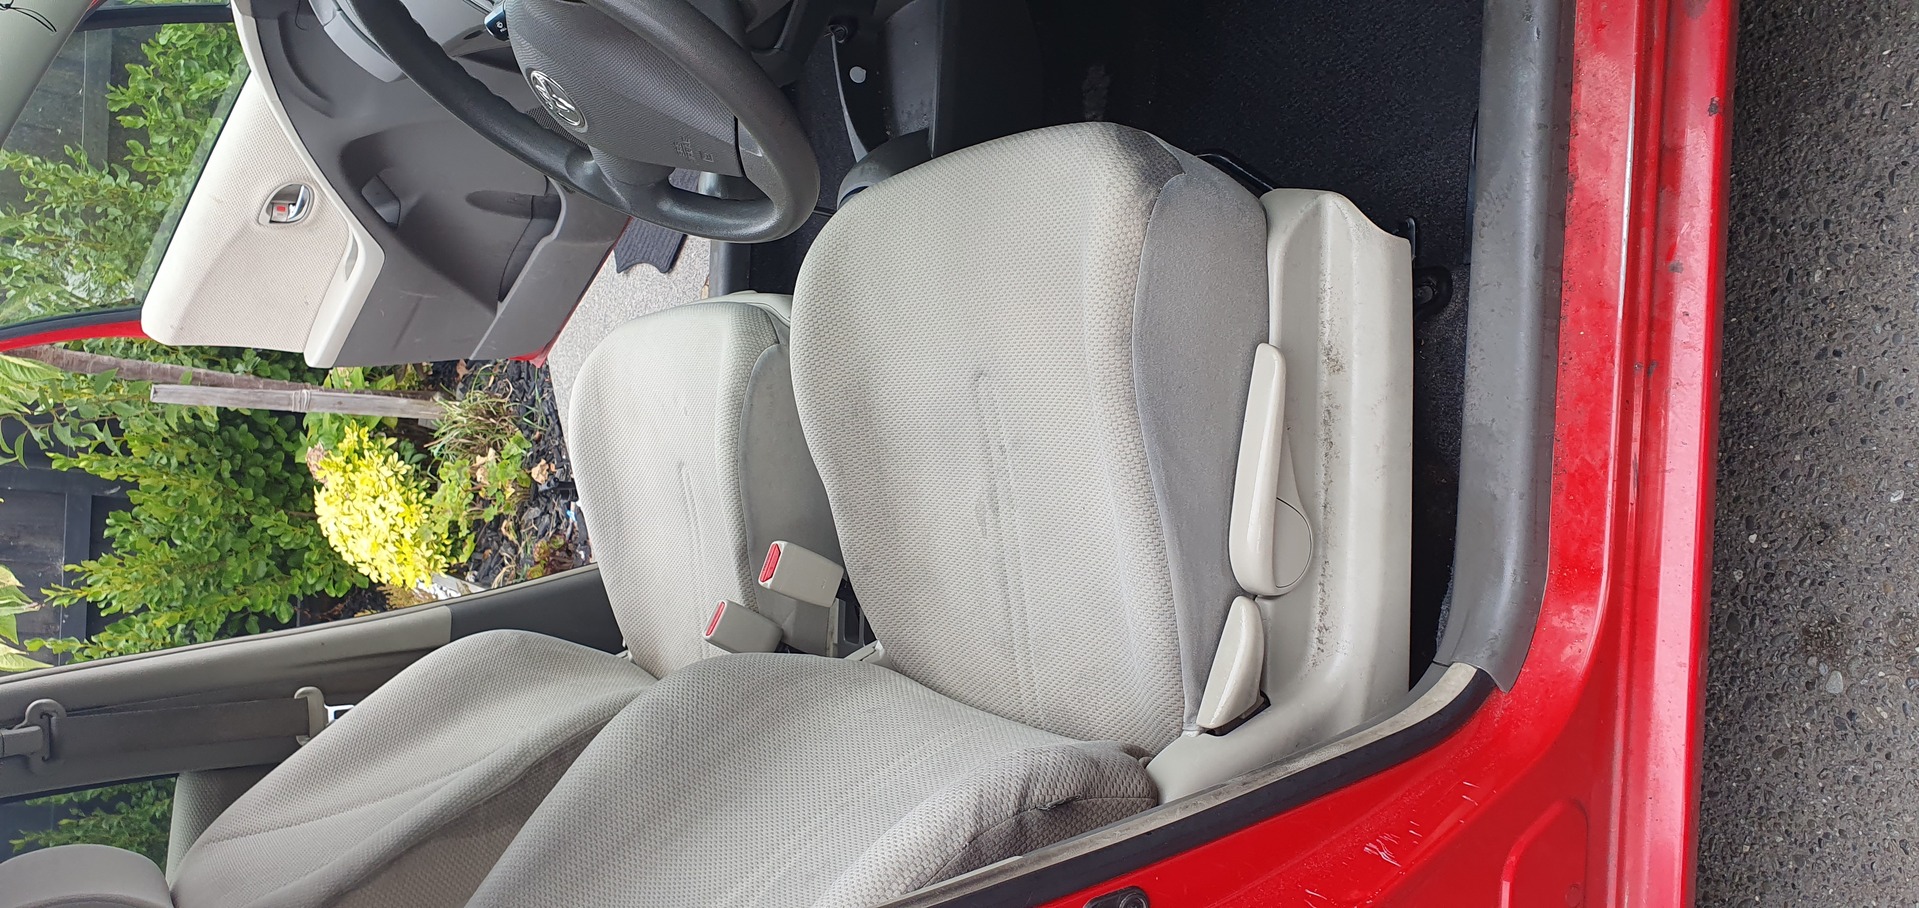 Cleaning front seats after pictures